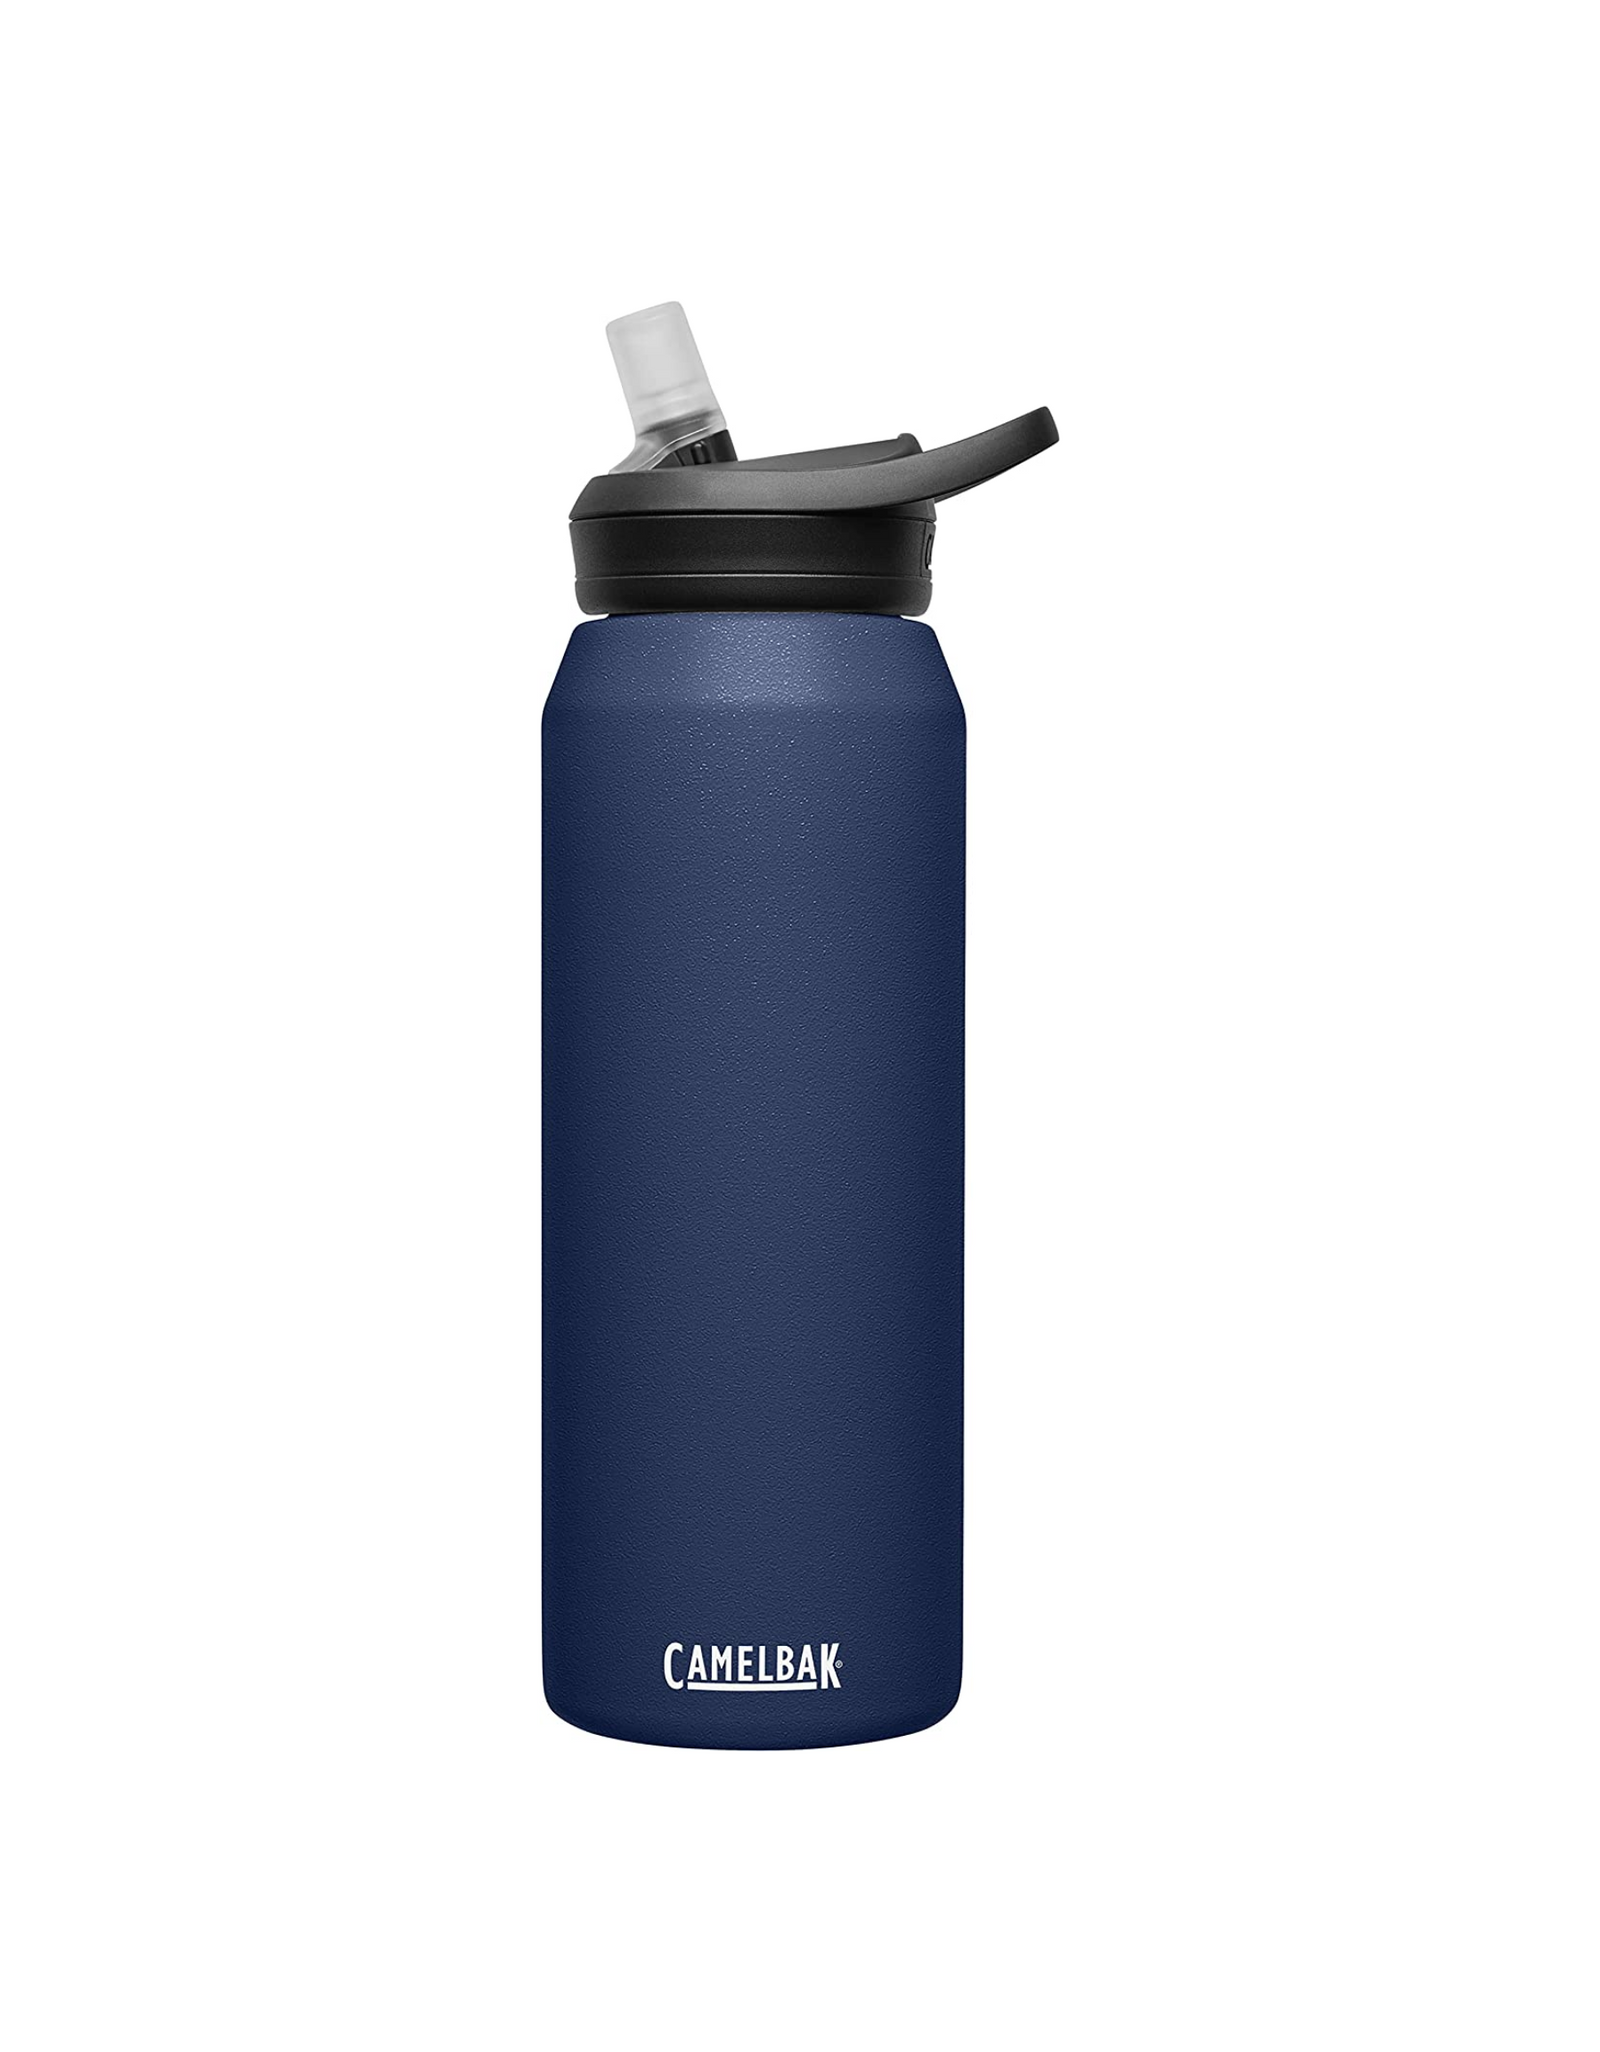 CamelBak eddy+ Vacuum Stainless Insulated Water Bottle, Stainless Steel, 32 oz, Navy